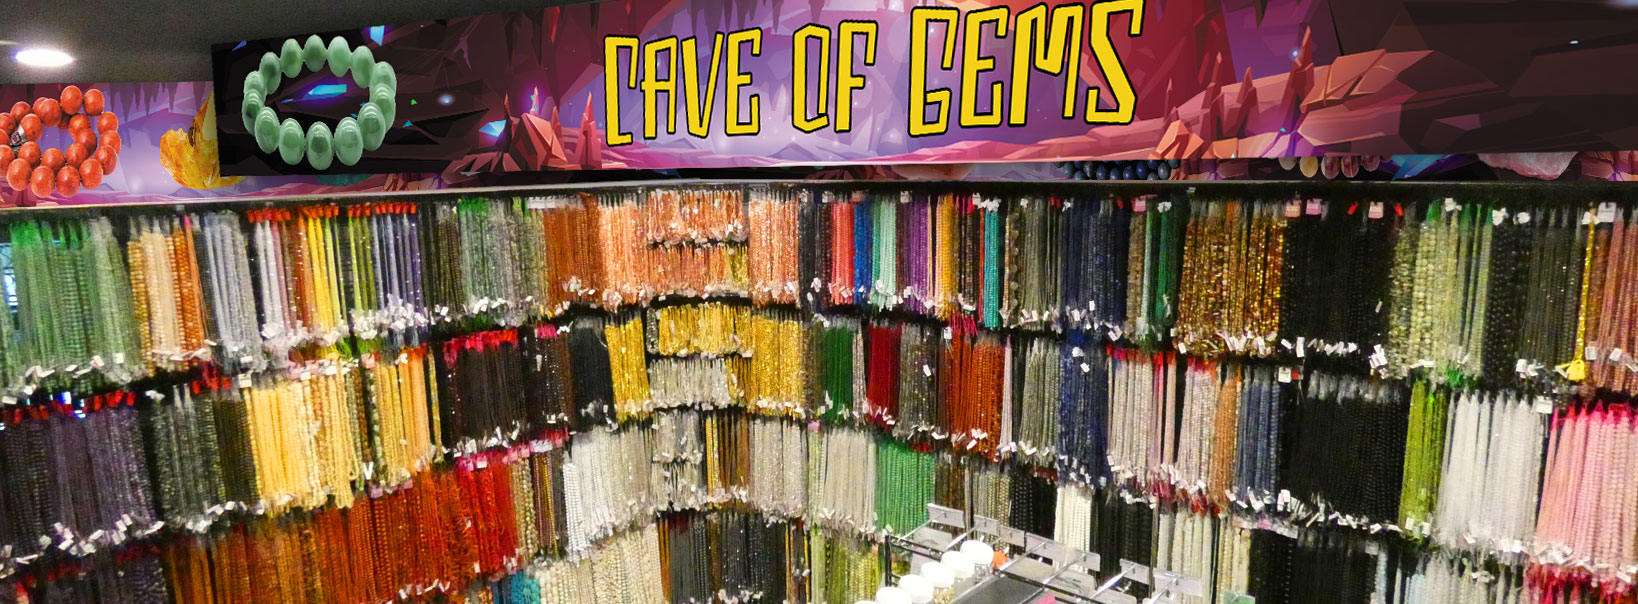 Explore our Cave of Gems at Beads N Crystals